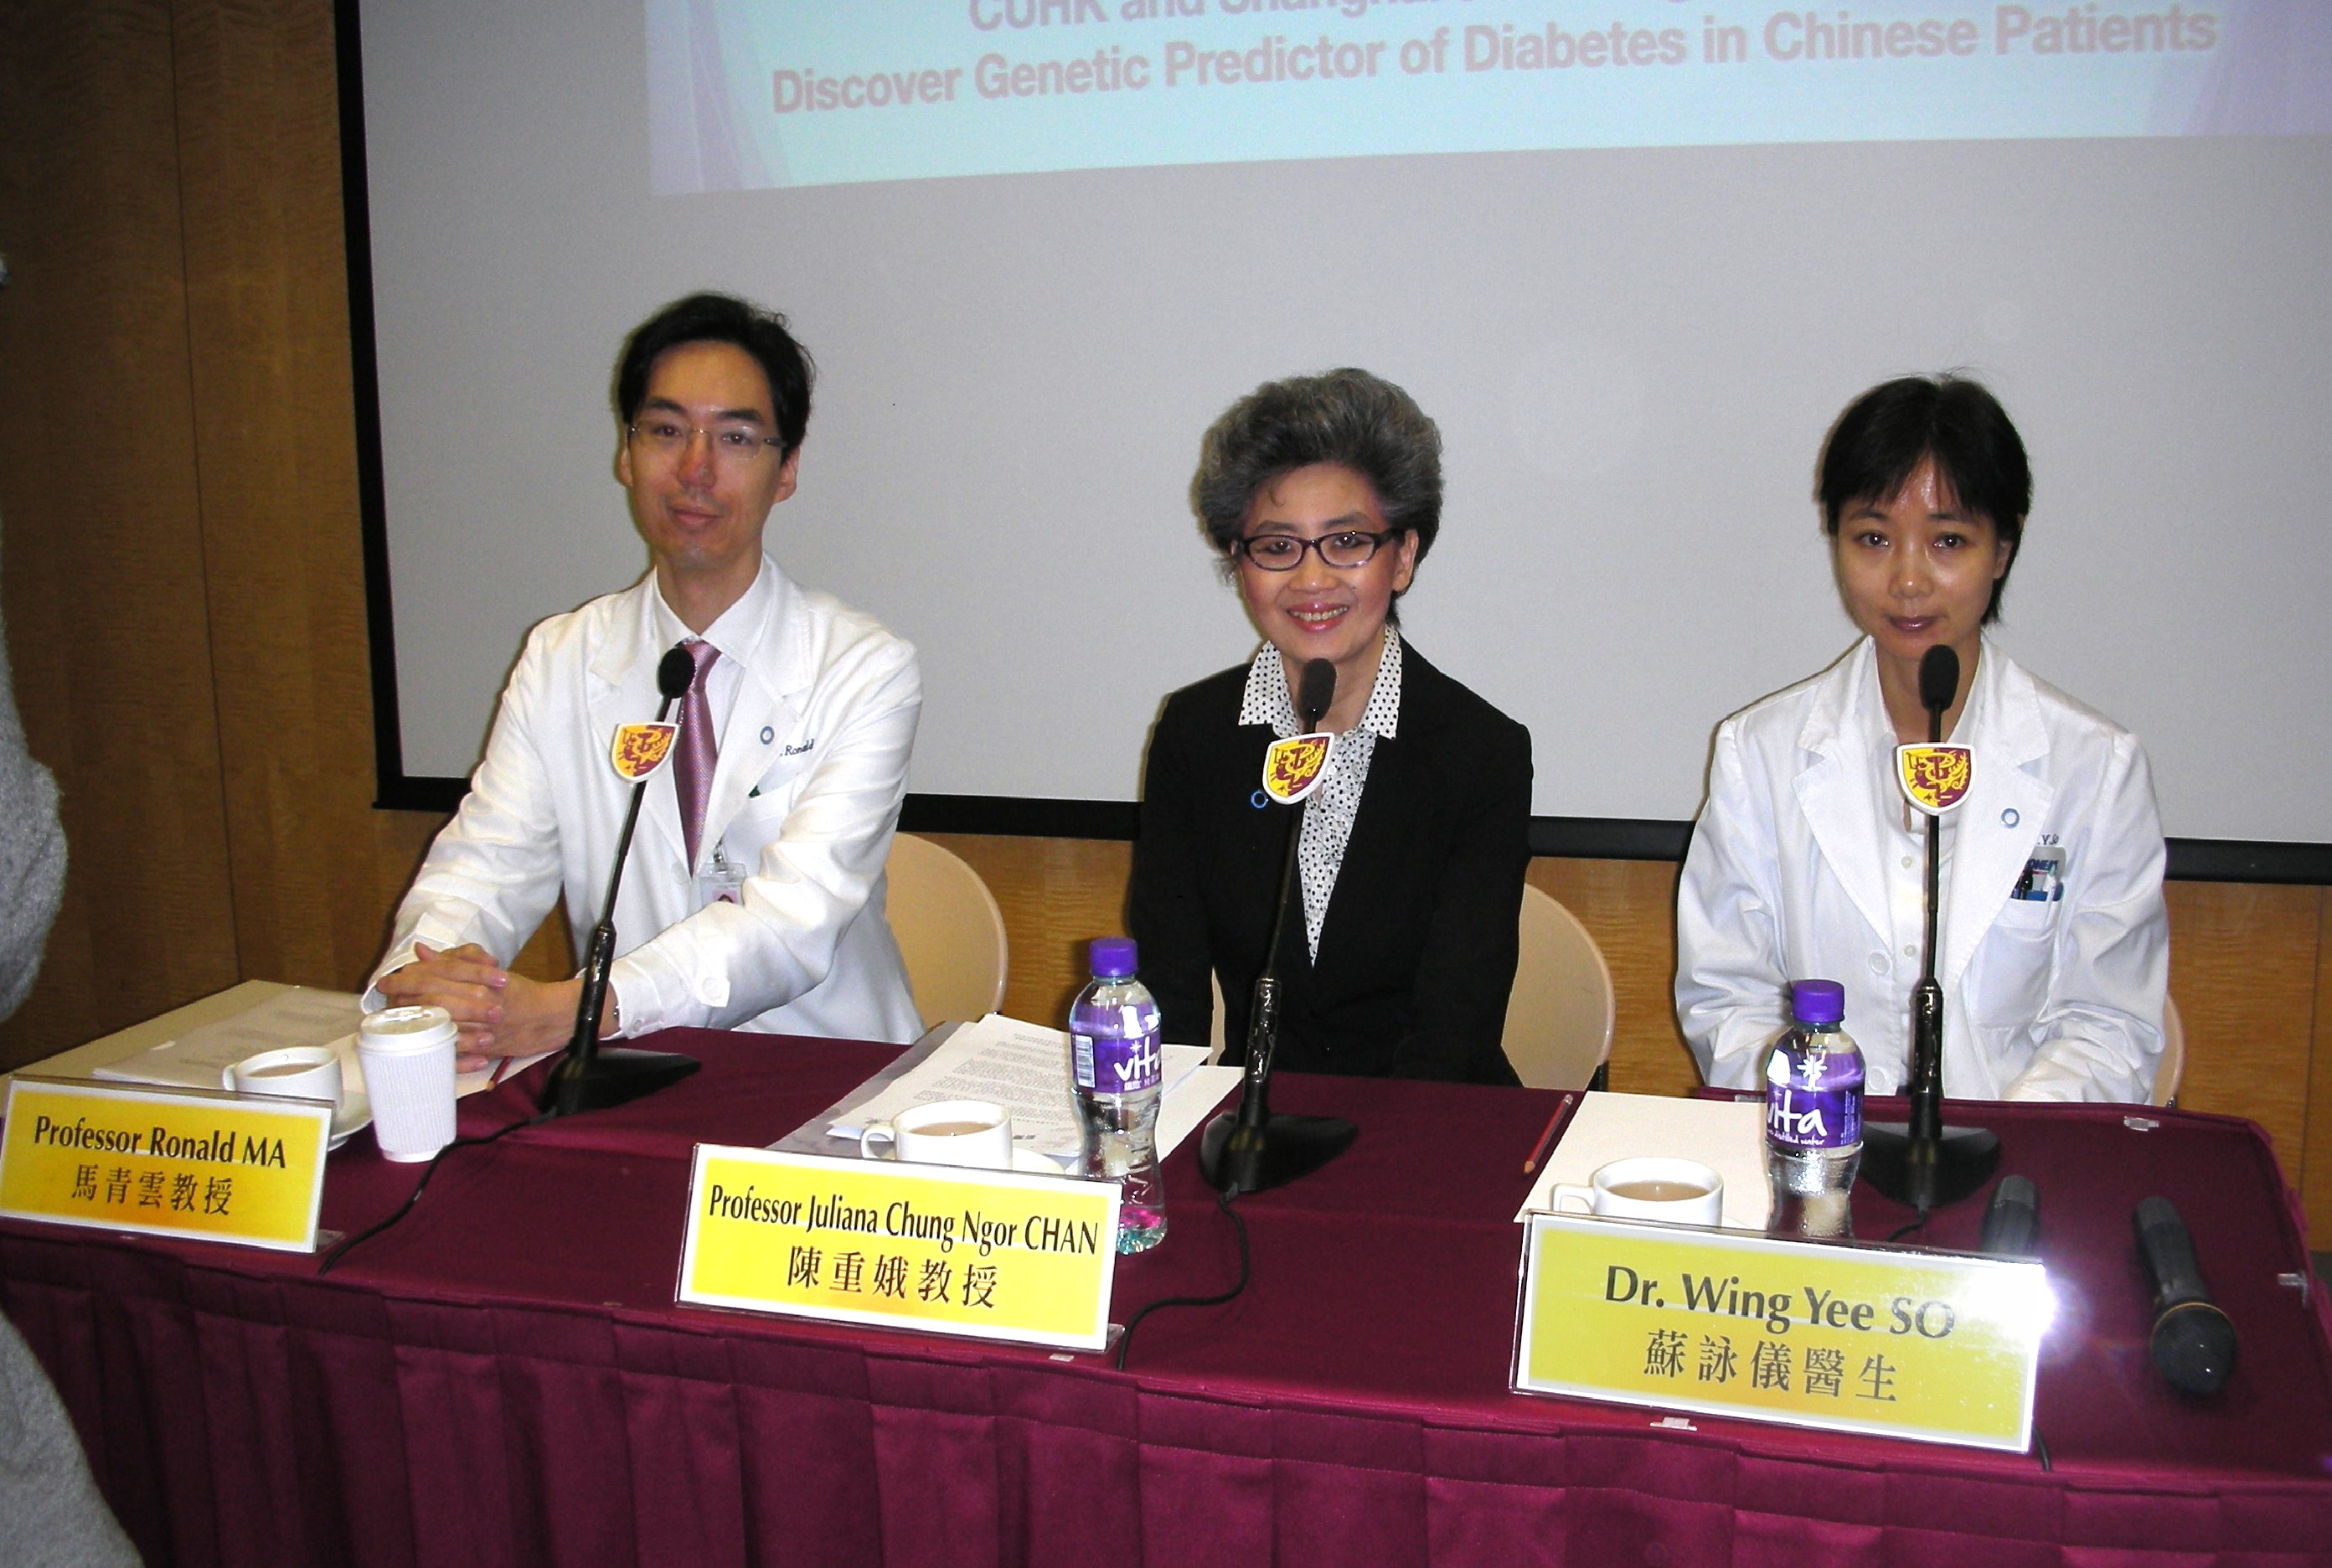 From Left) Professor Ronald Ching Wan MA, Professor, Division of Endocrinology and Diabetes, Department of Medicine and Therapeutics; Professor Juliana Chung Ngor CHAN; Dr Wing Yee SO, Clinical Associate Professor (Honorary), Department of Medicine and Therapeutics at CUHK